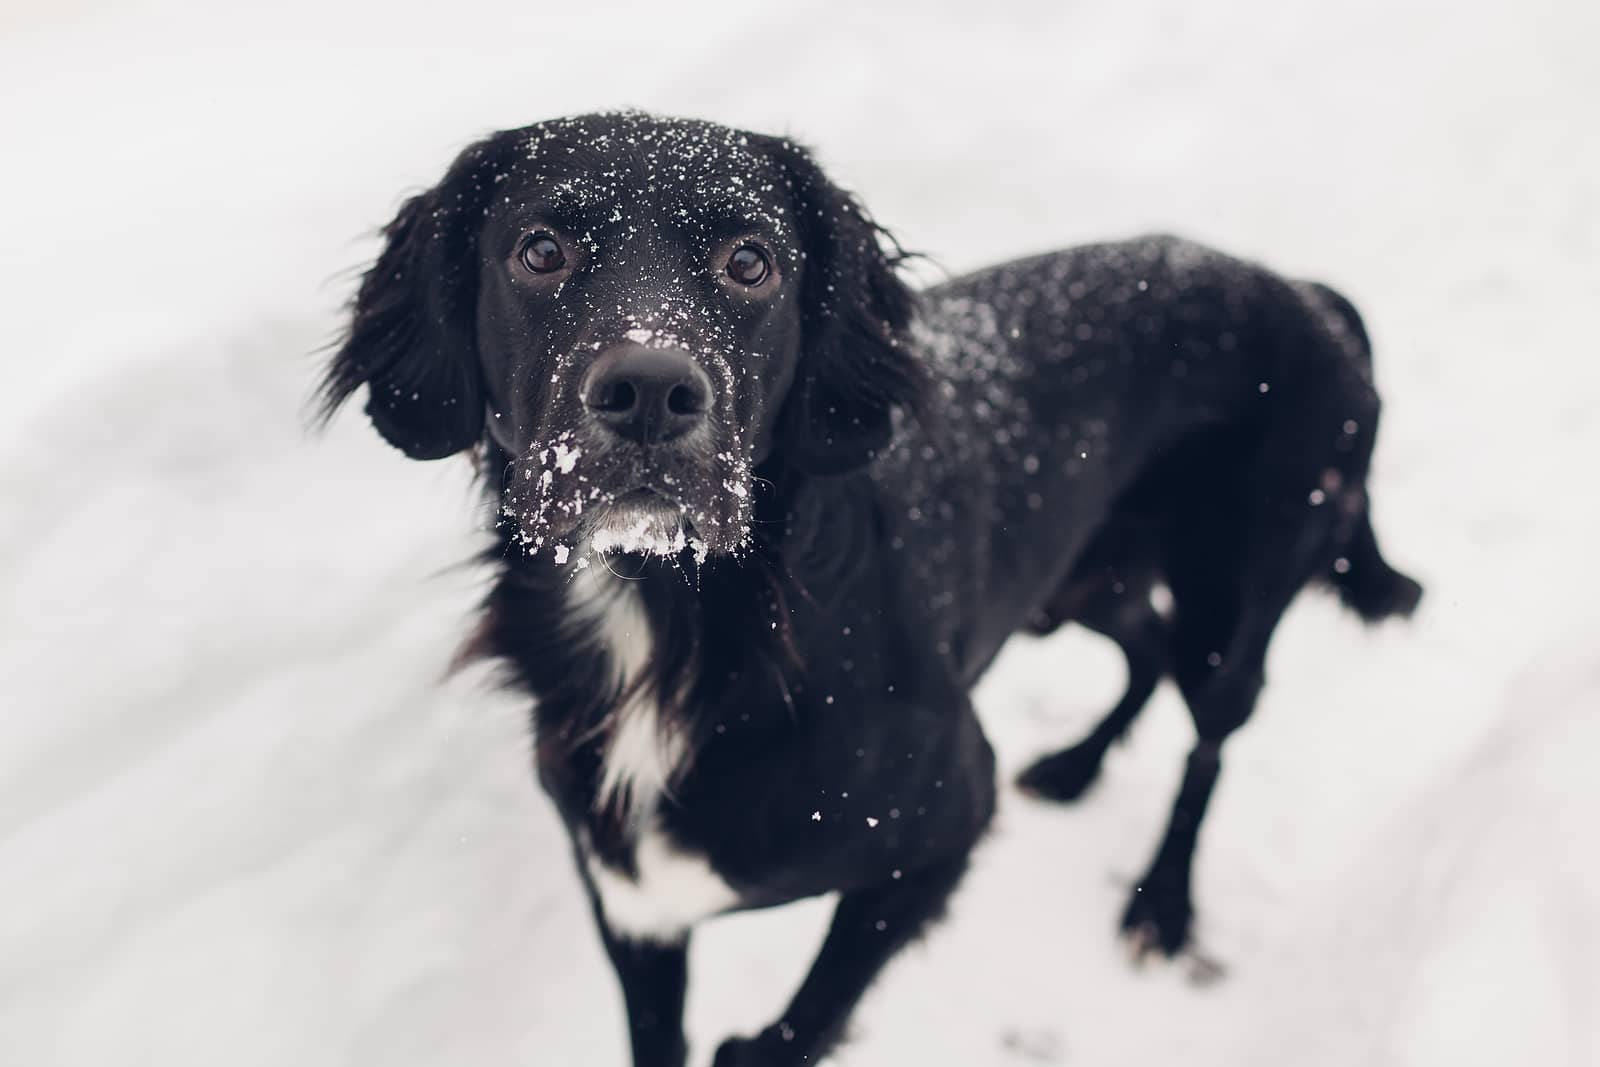 black-dog-walking-outdoors-on-snow-after-blizzard-pet-has-snow